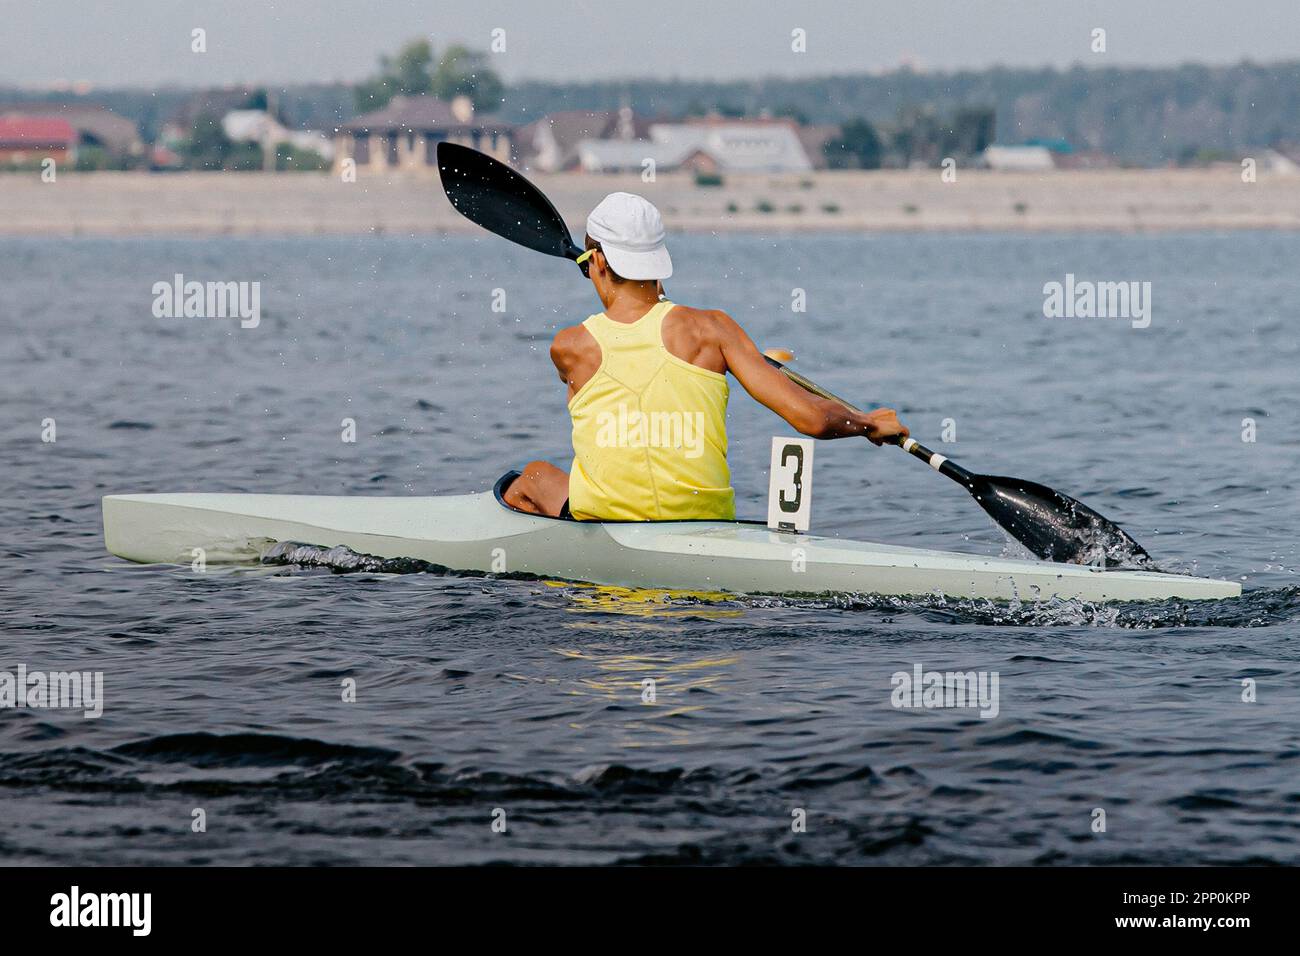 rear view male athlete on kayak single in kayaking competition race, sports summer games Stock Photo